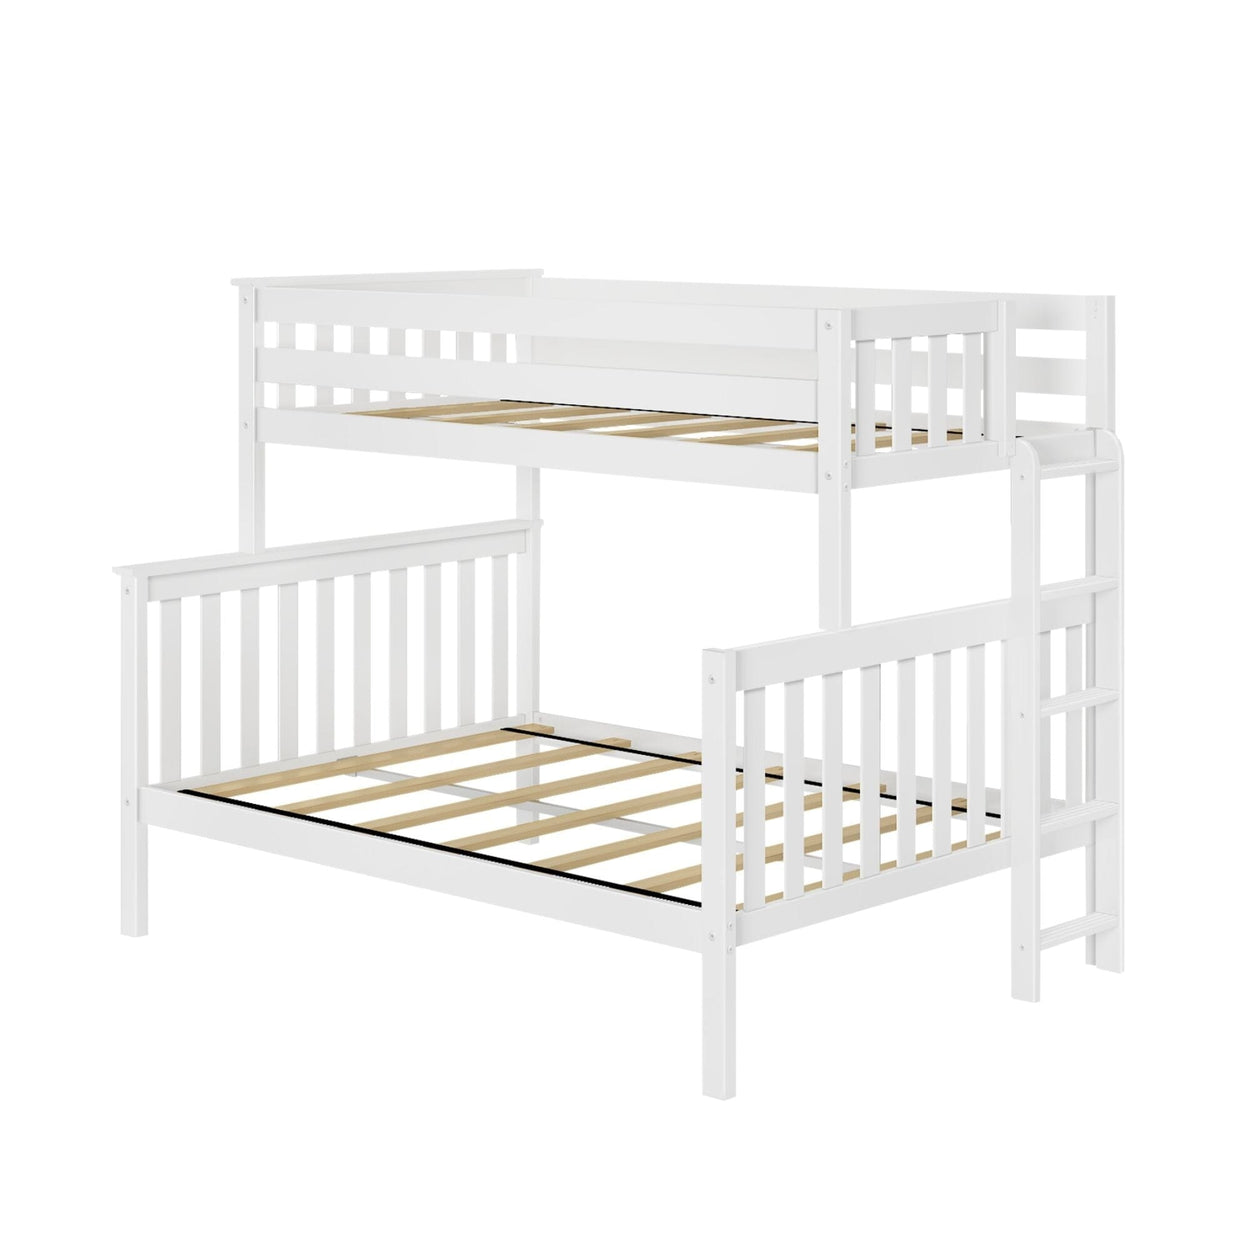 185335-002 : Bunk Beds Twin over Full Bunk Bed with Ladder on End, White